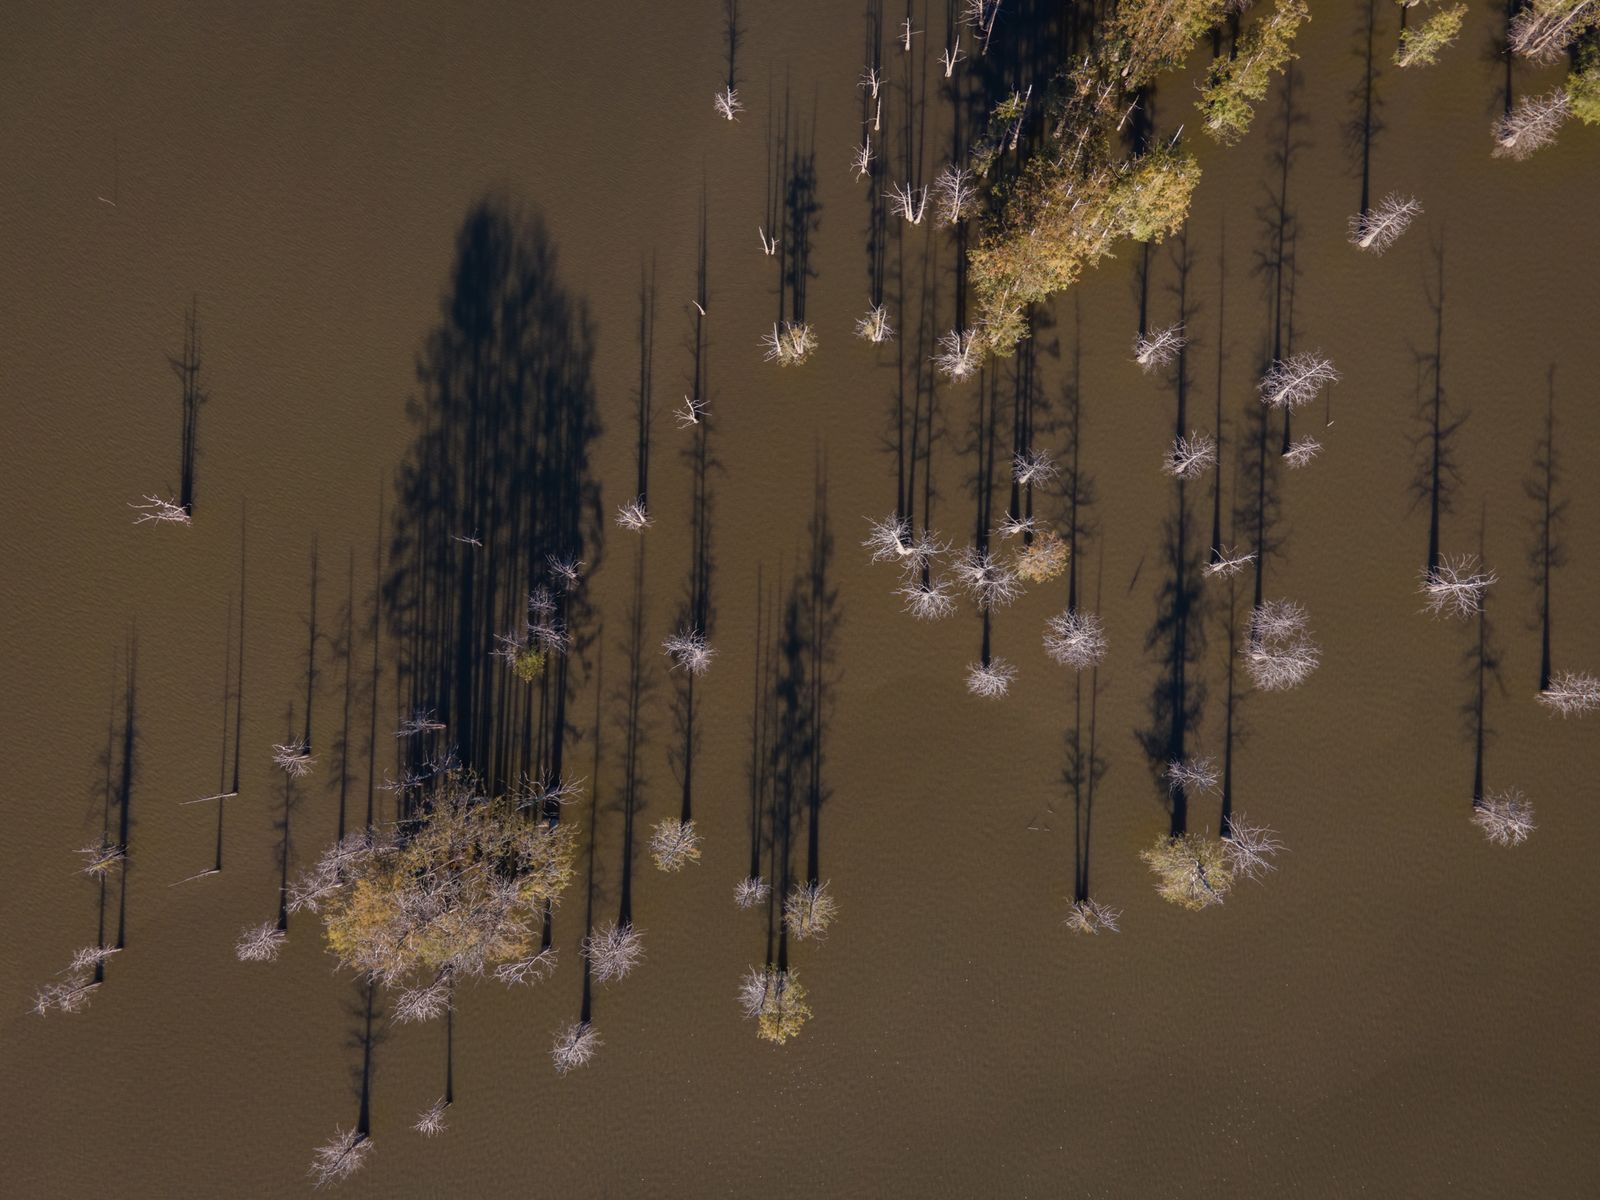 © Rory Doyle - Cypress trees decorate the landscape of a small oxbow lake on the Mississippi River near Fort Adams, Mississippi, USA.